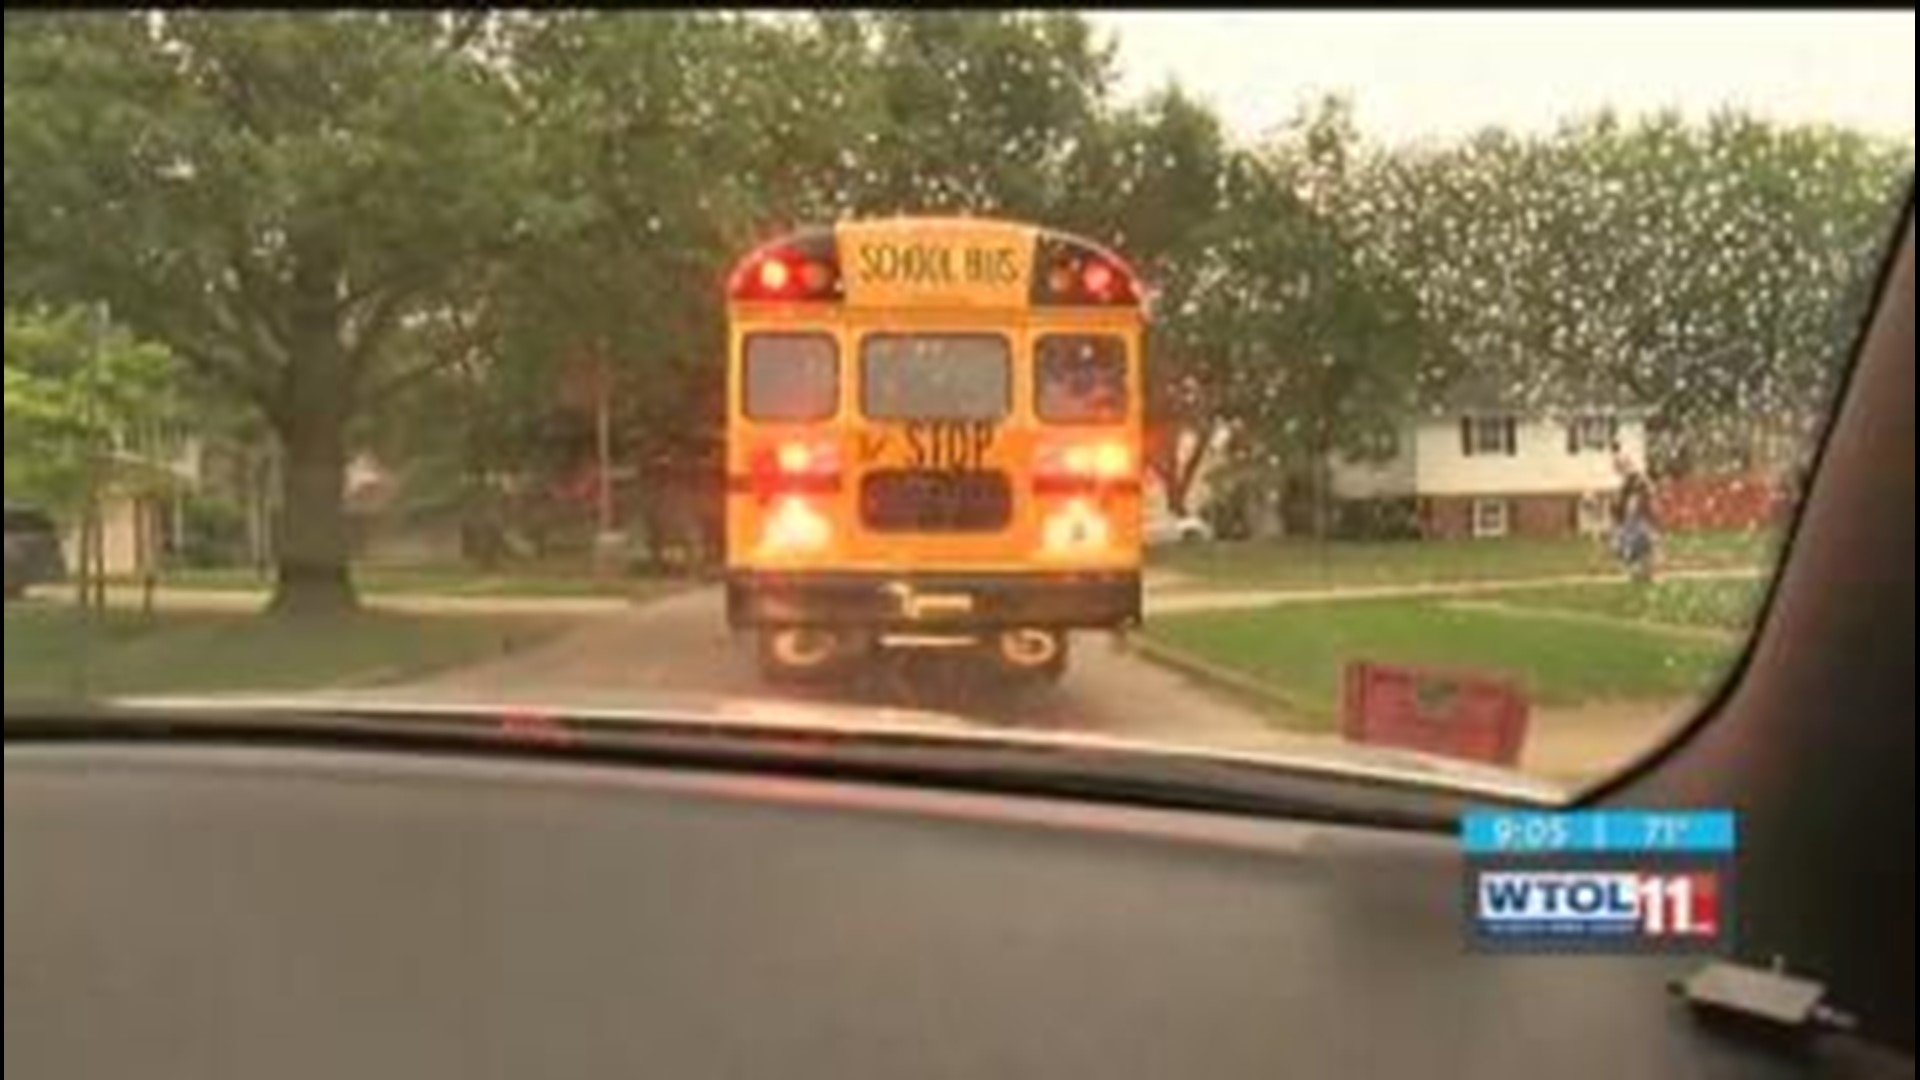 Drivers, students should brush up on school bus safety every year